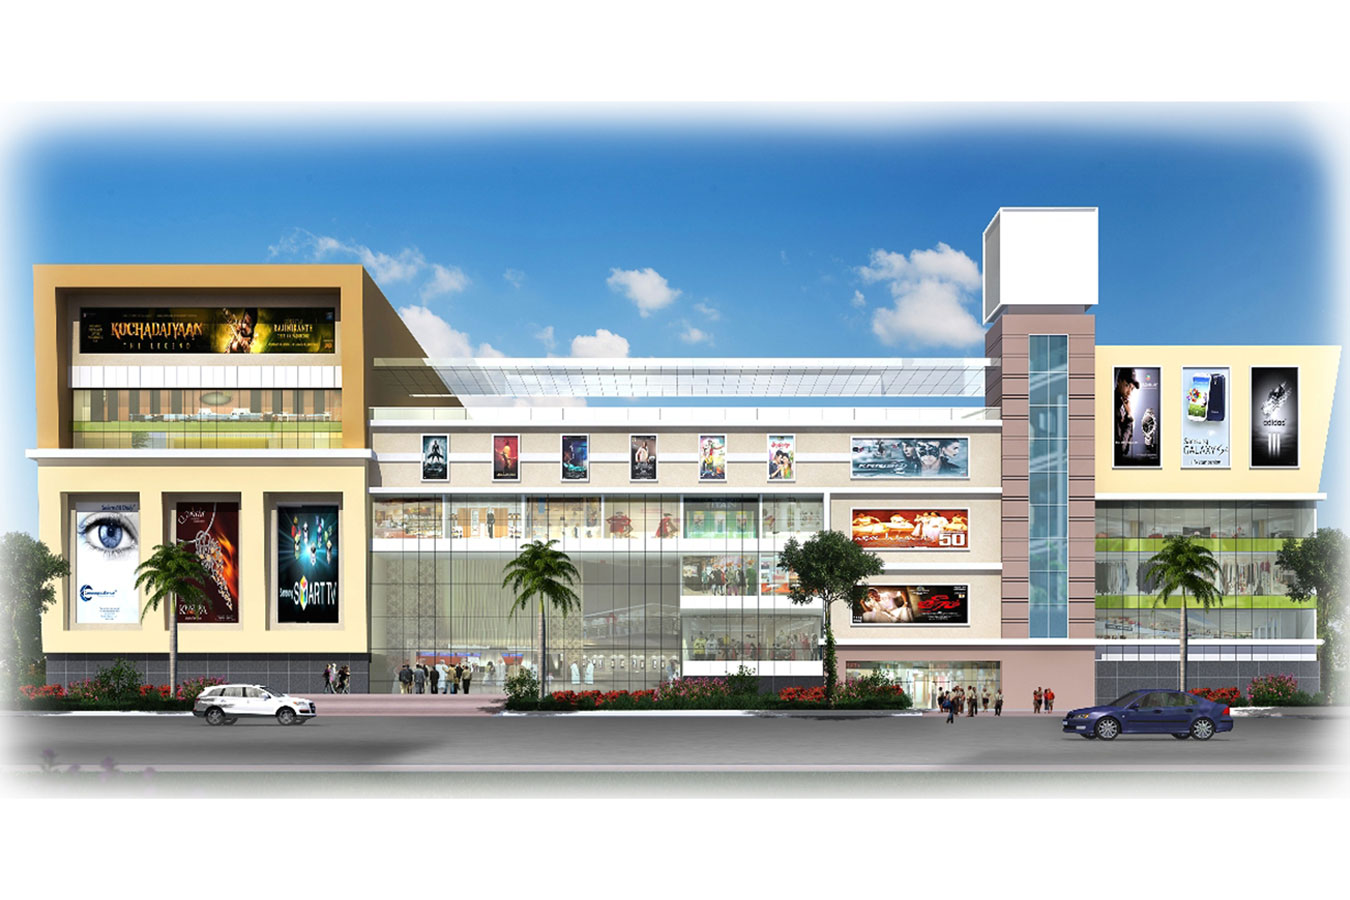 MALL AT THRISSUR